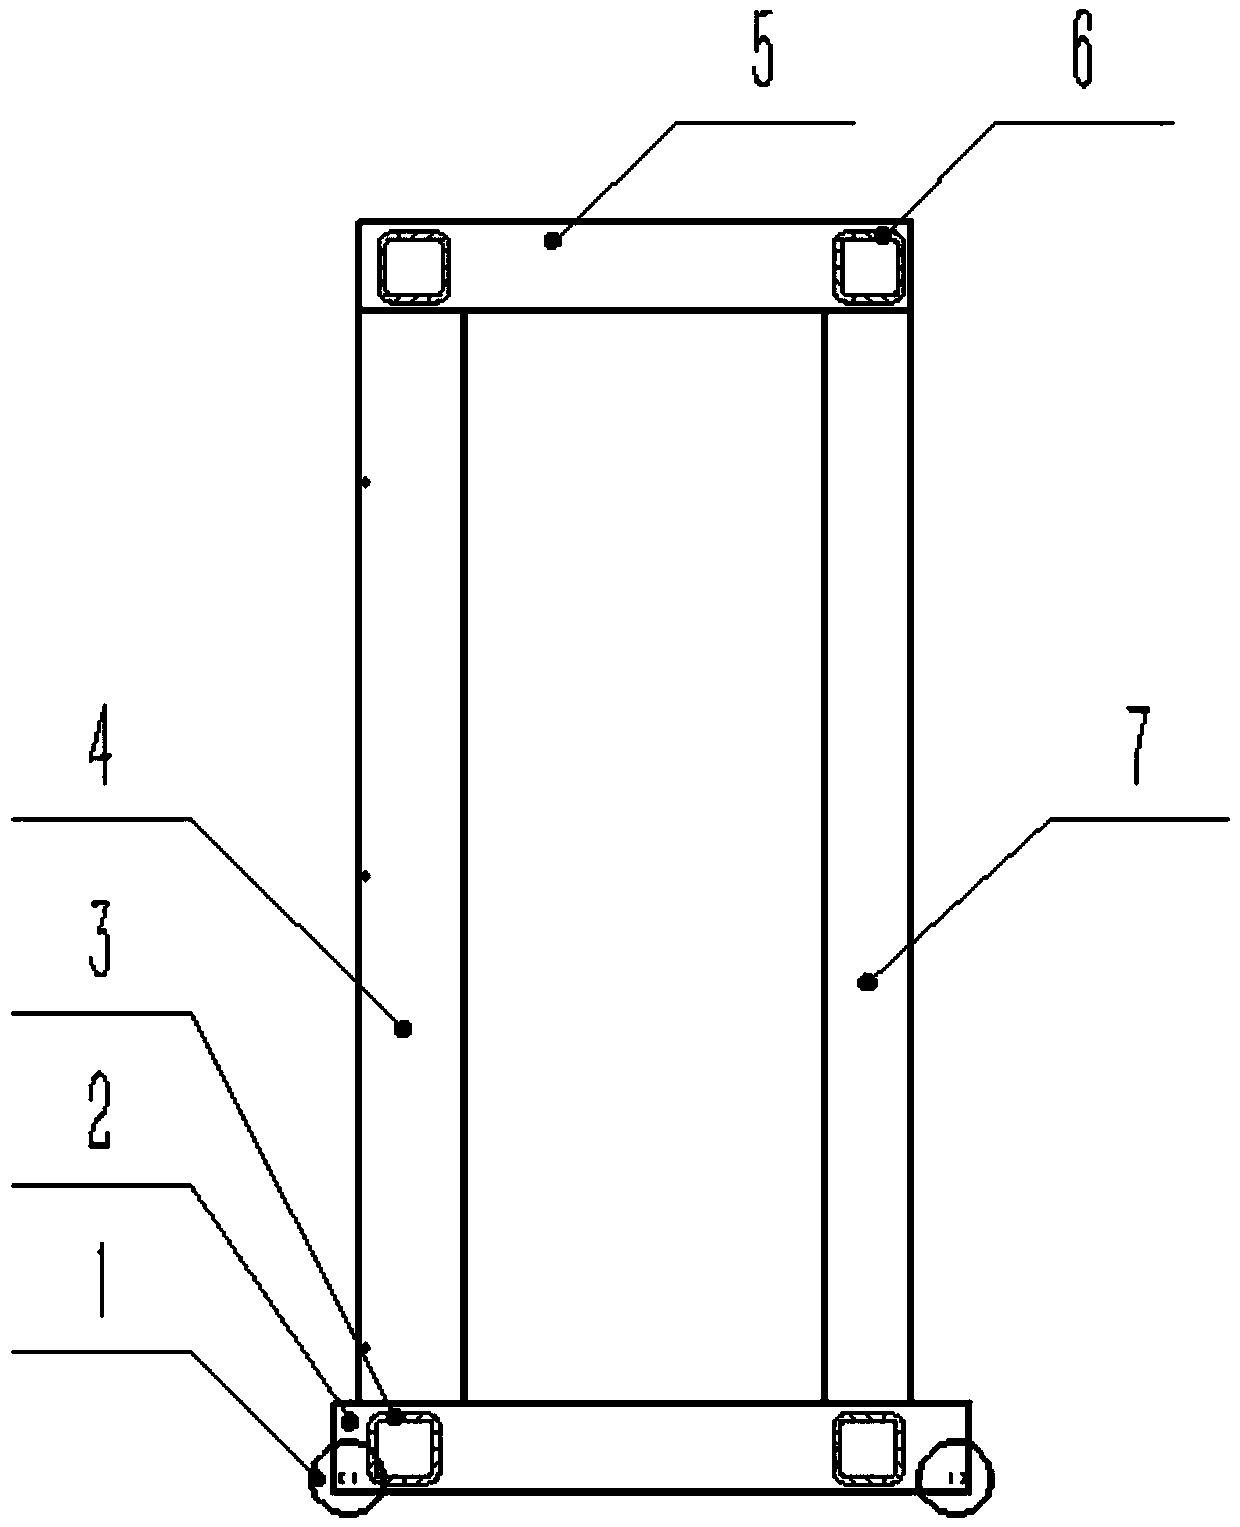 Automatic device for cleaning vertical urinal